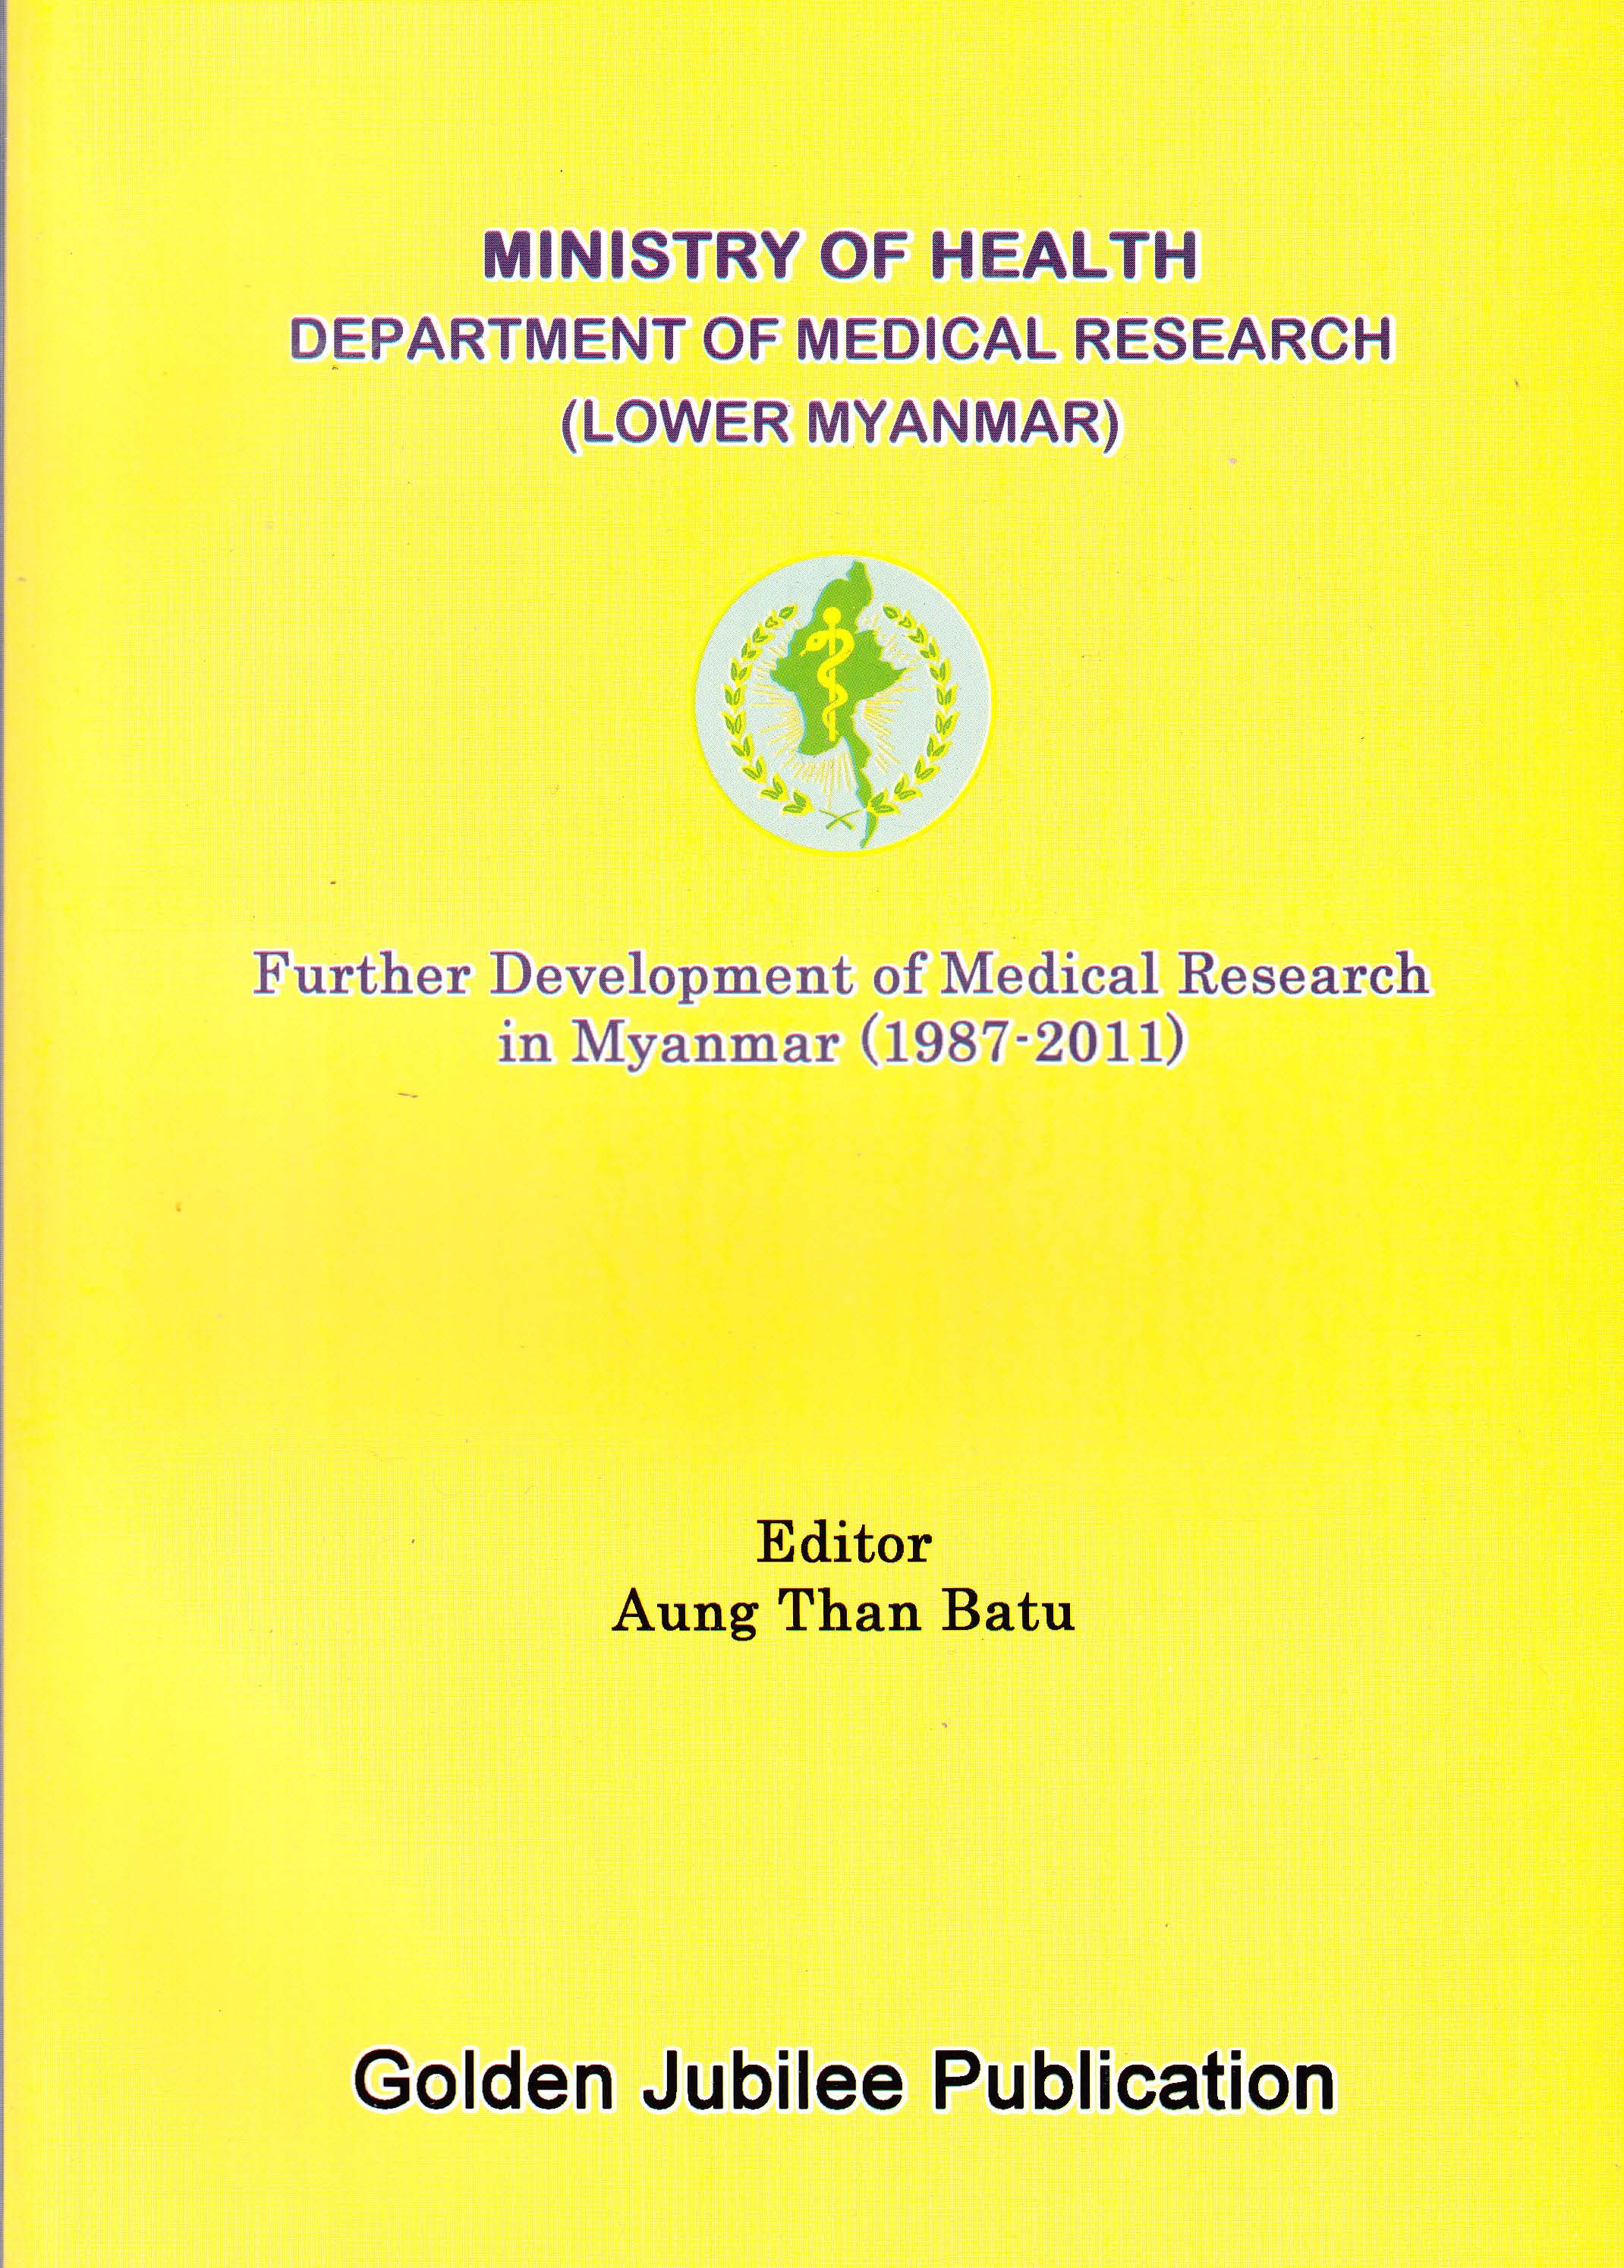 Further Development of Medical Research in Myanmar